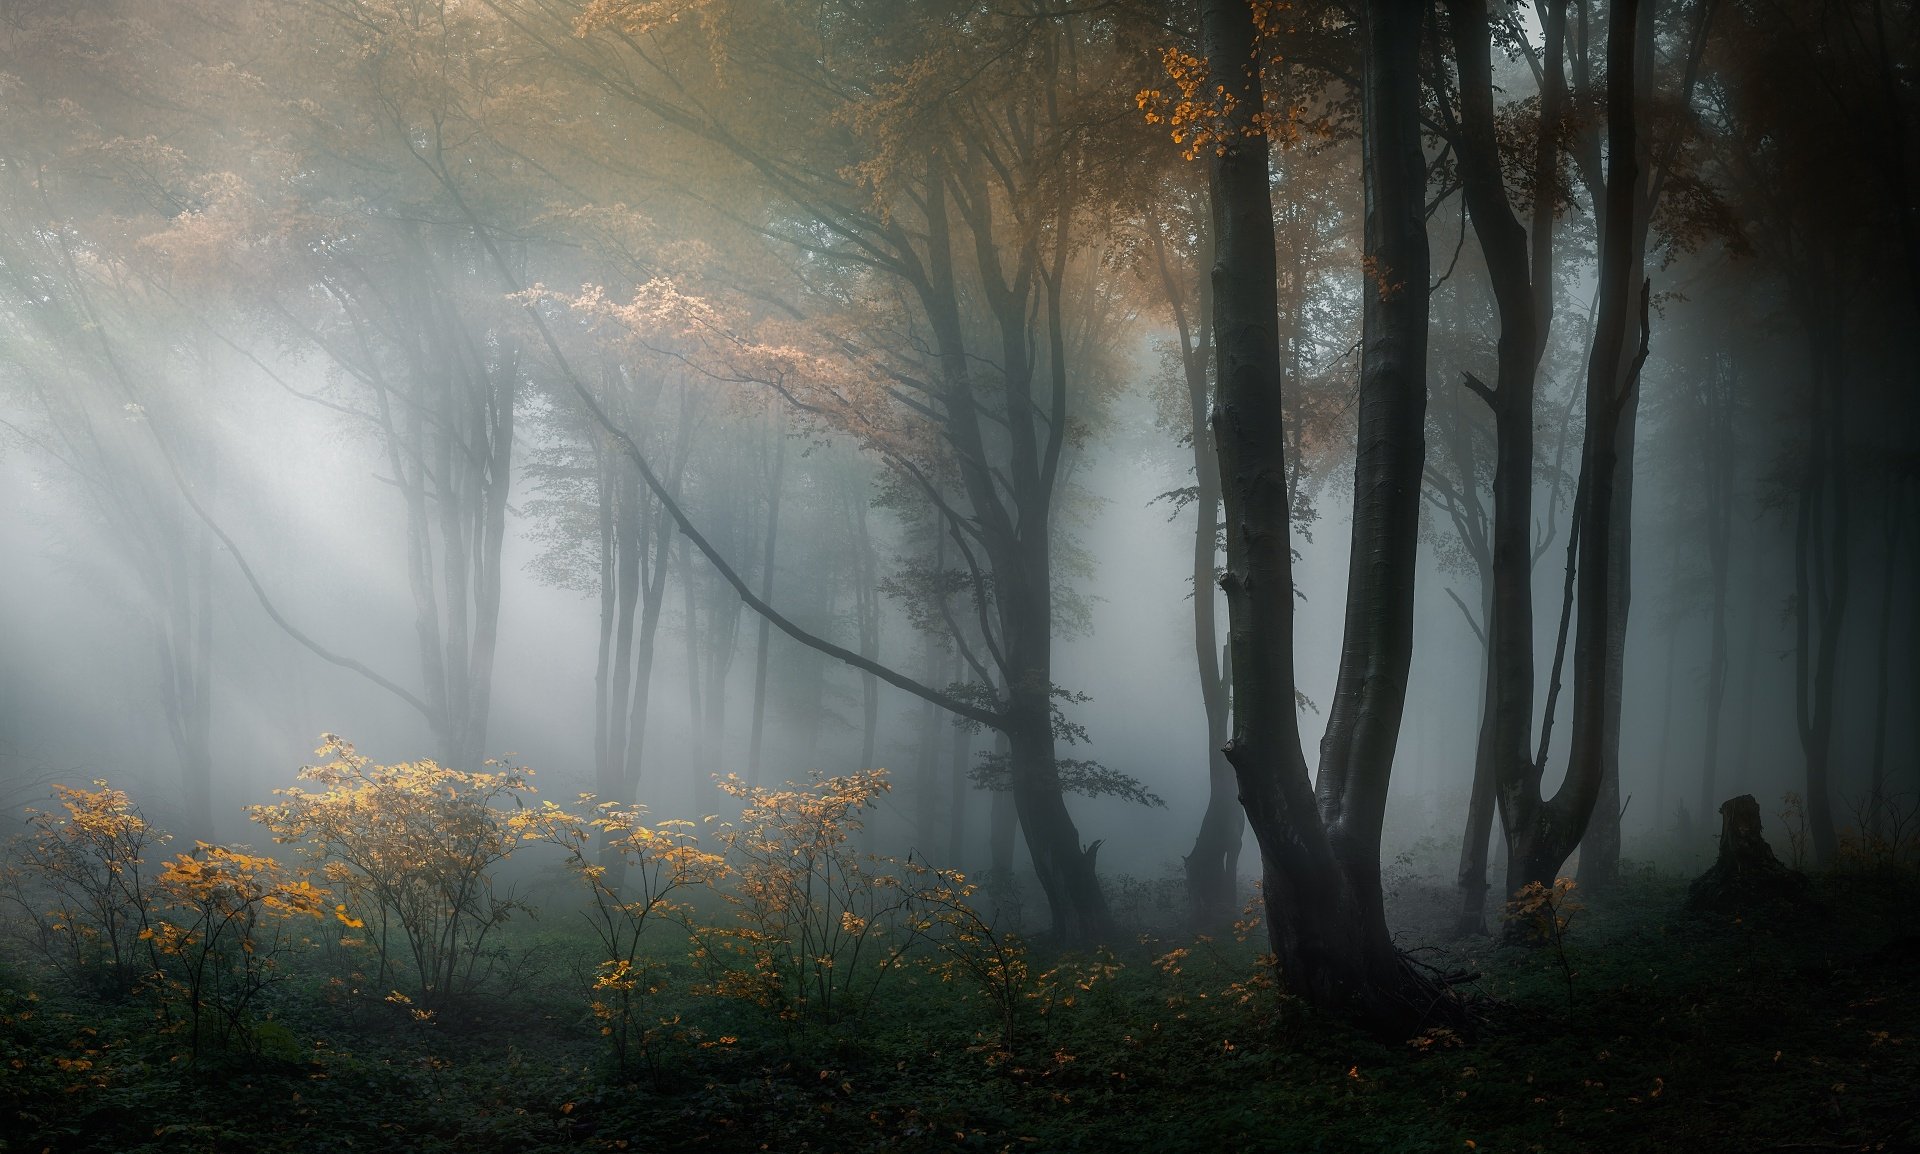 A foggy forest with trees and plants. - Fog